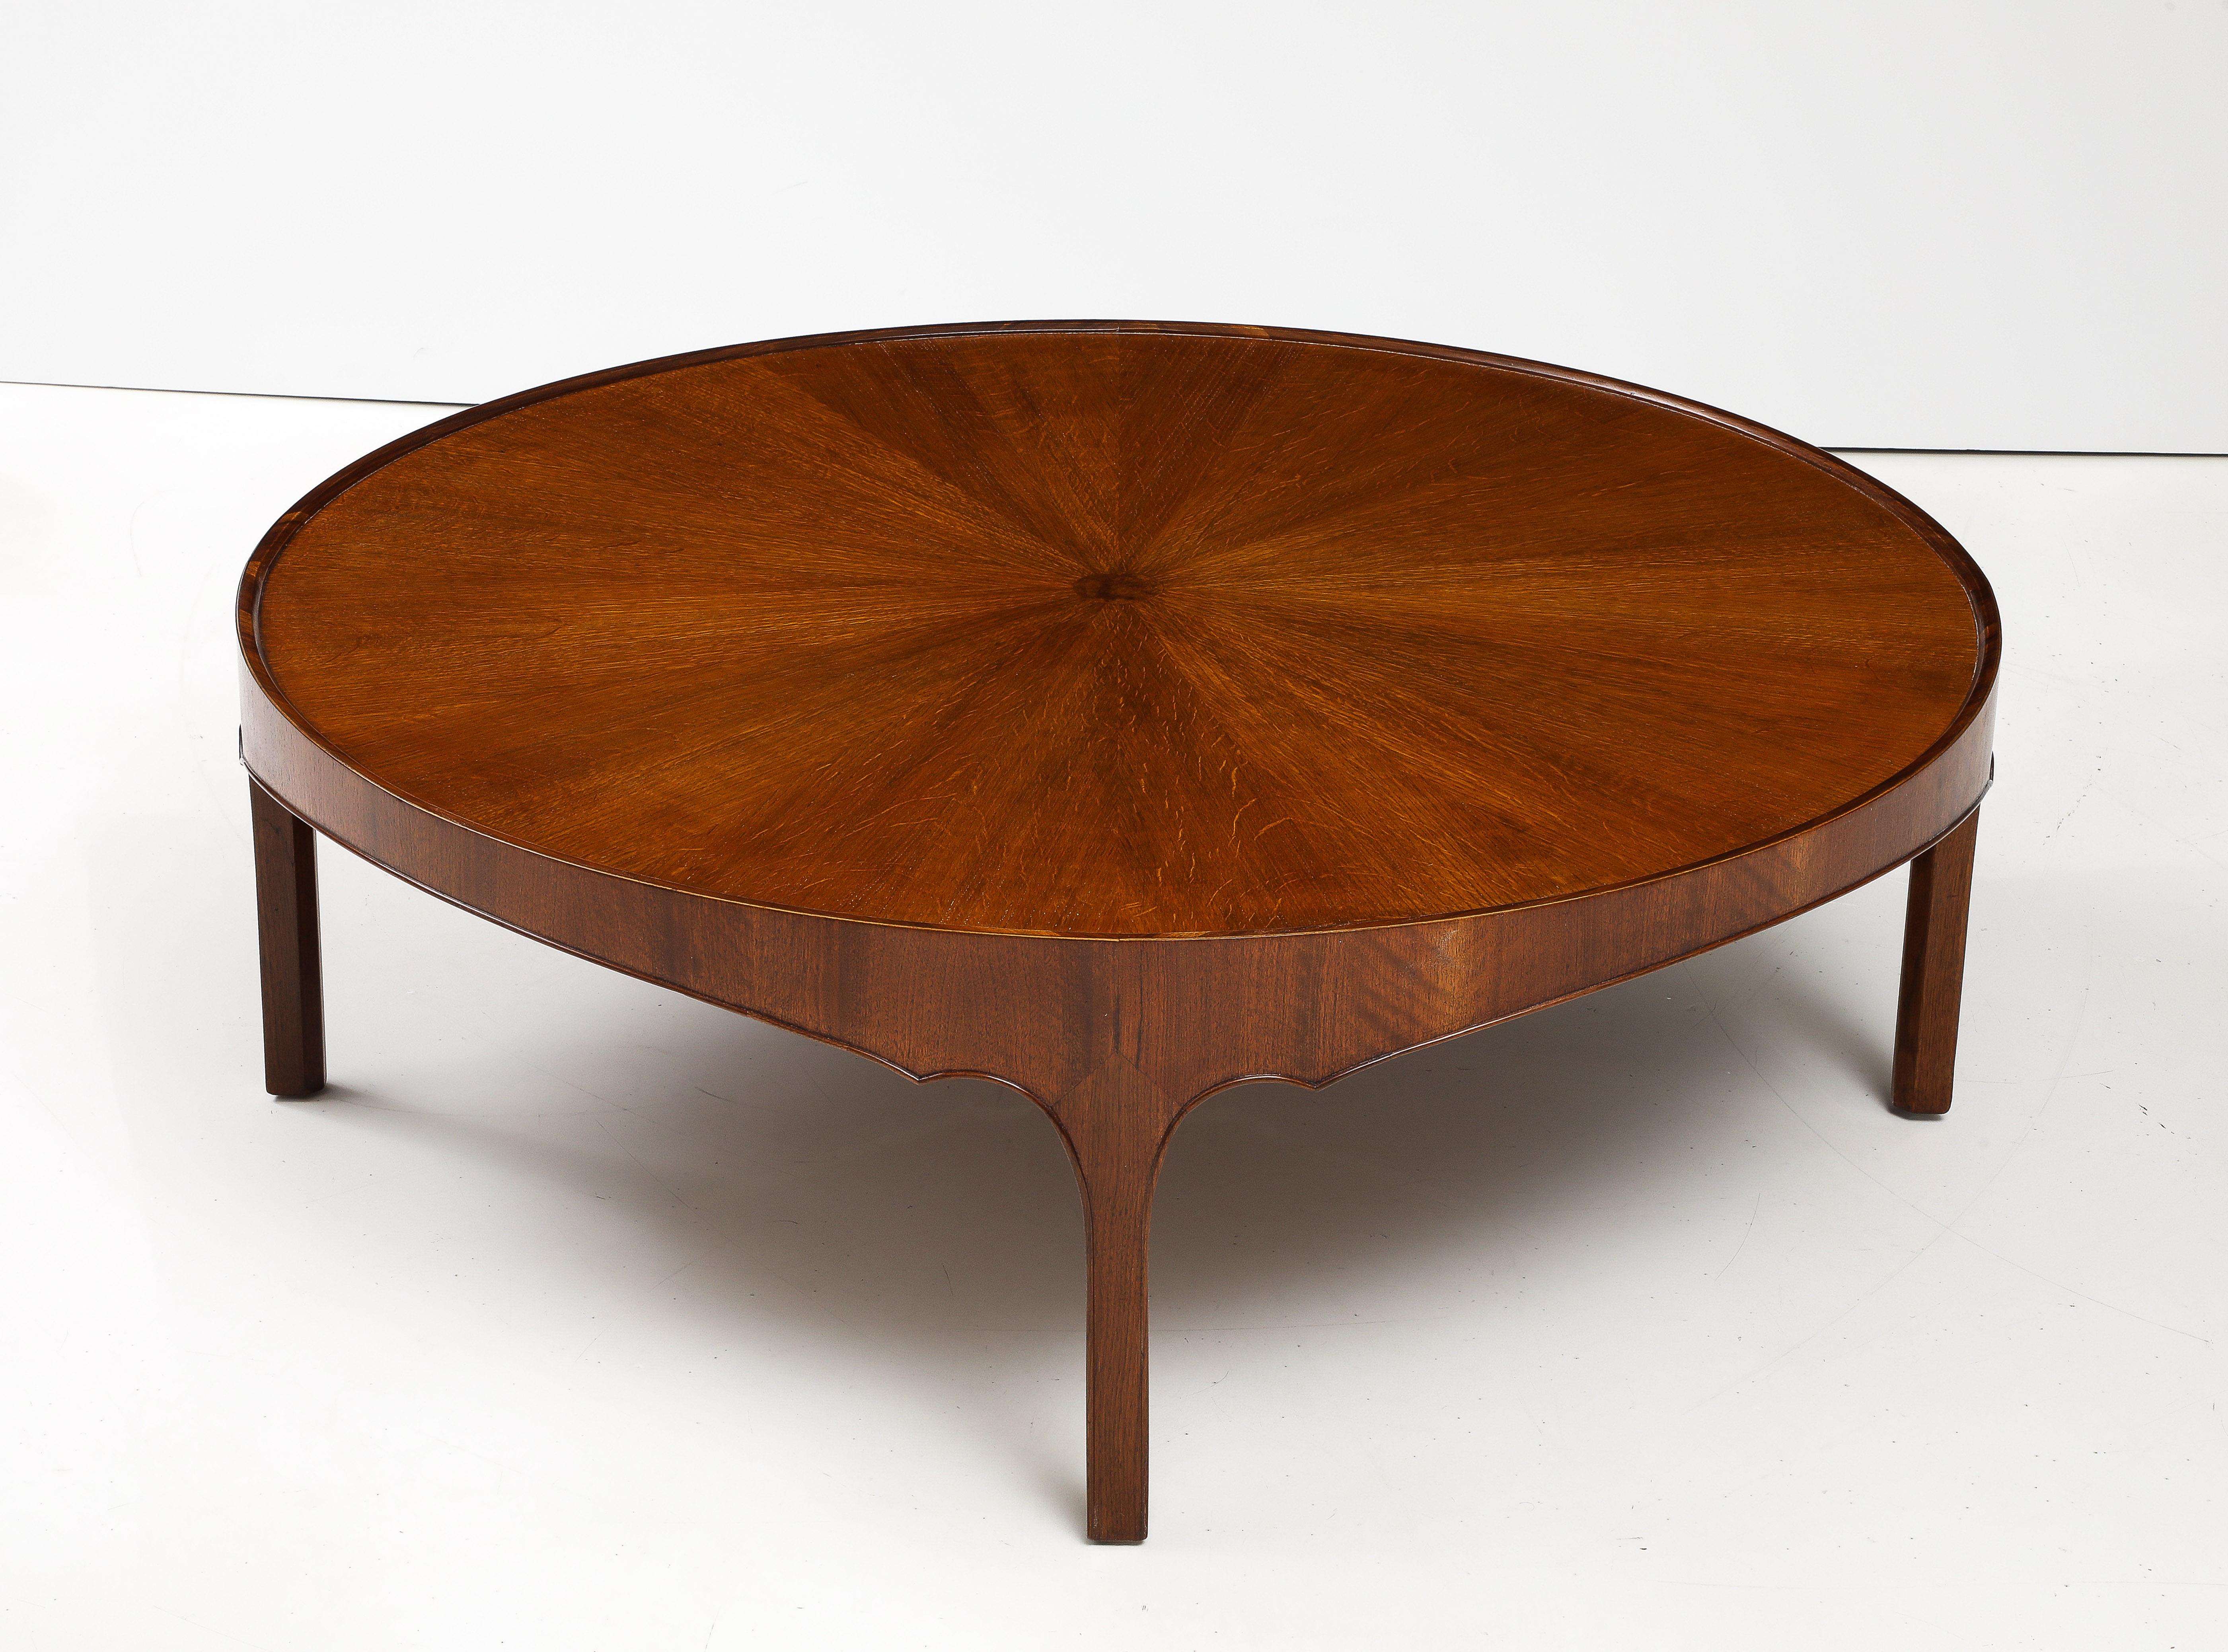 Amazing 1960's mid-century modern oversized round coffee table with sunburst top by Baker furniture, fully restored with minor wear and patina due to age and use.